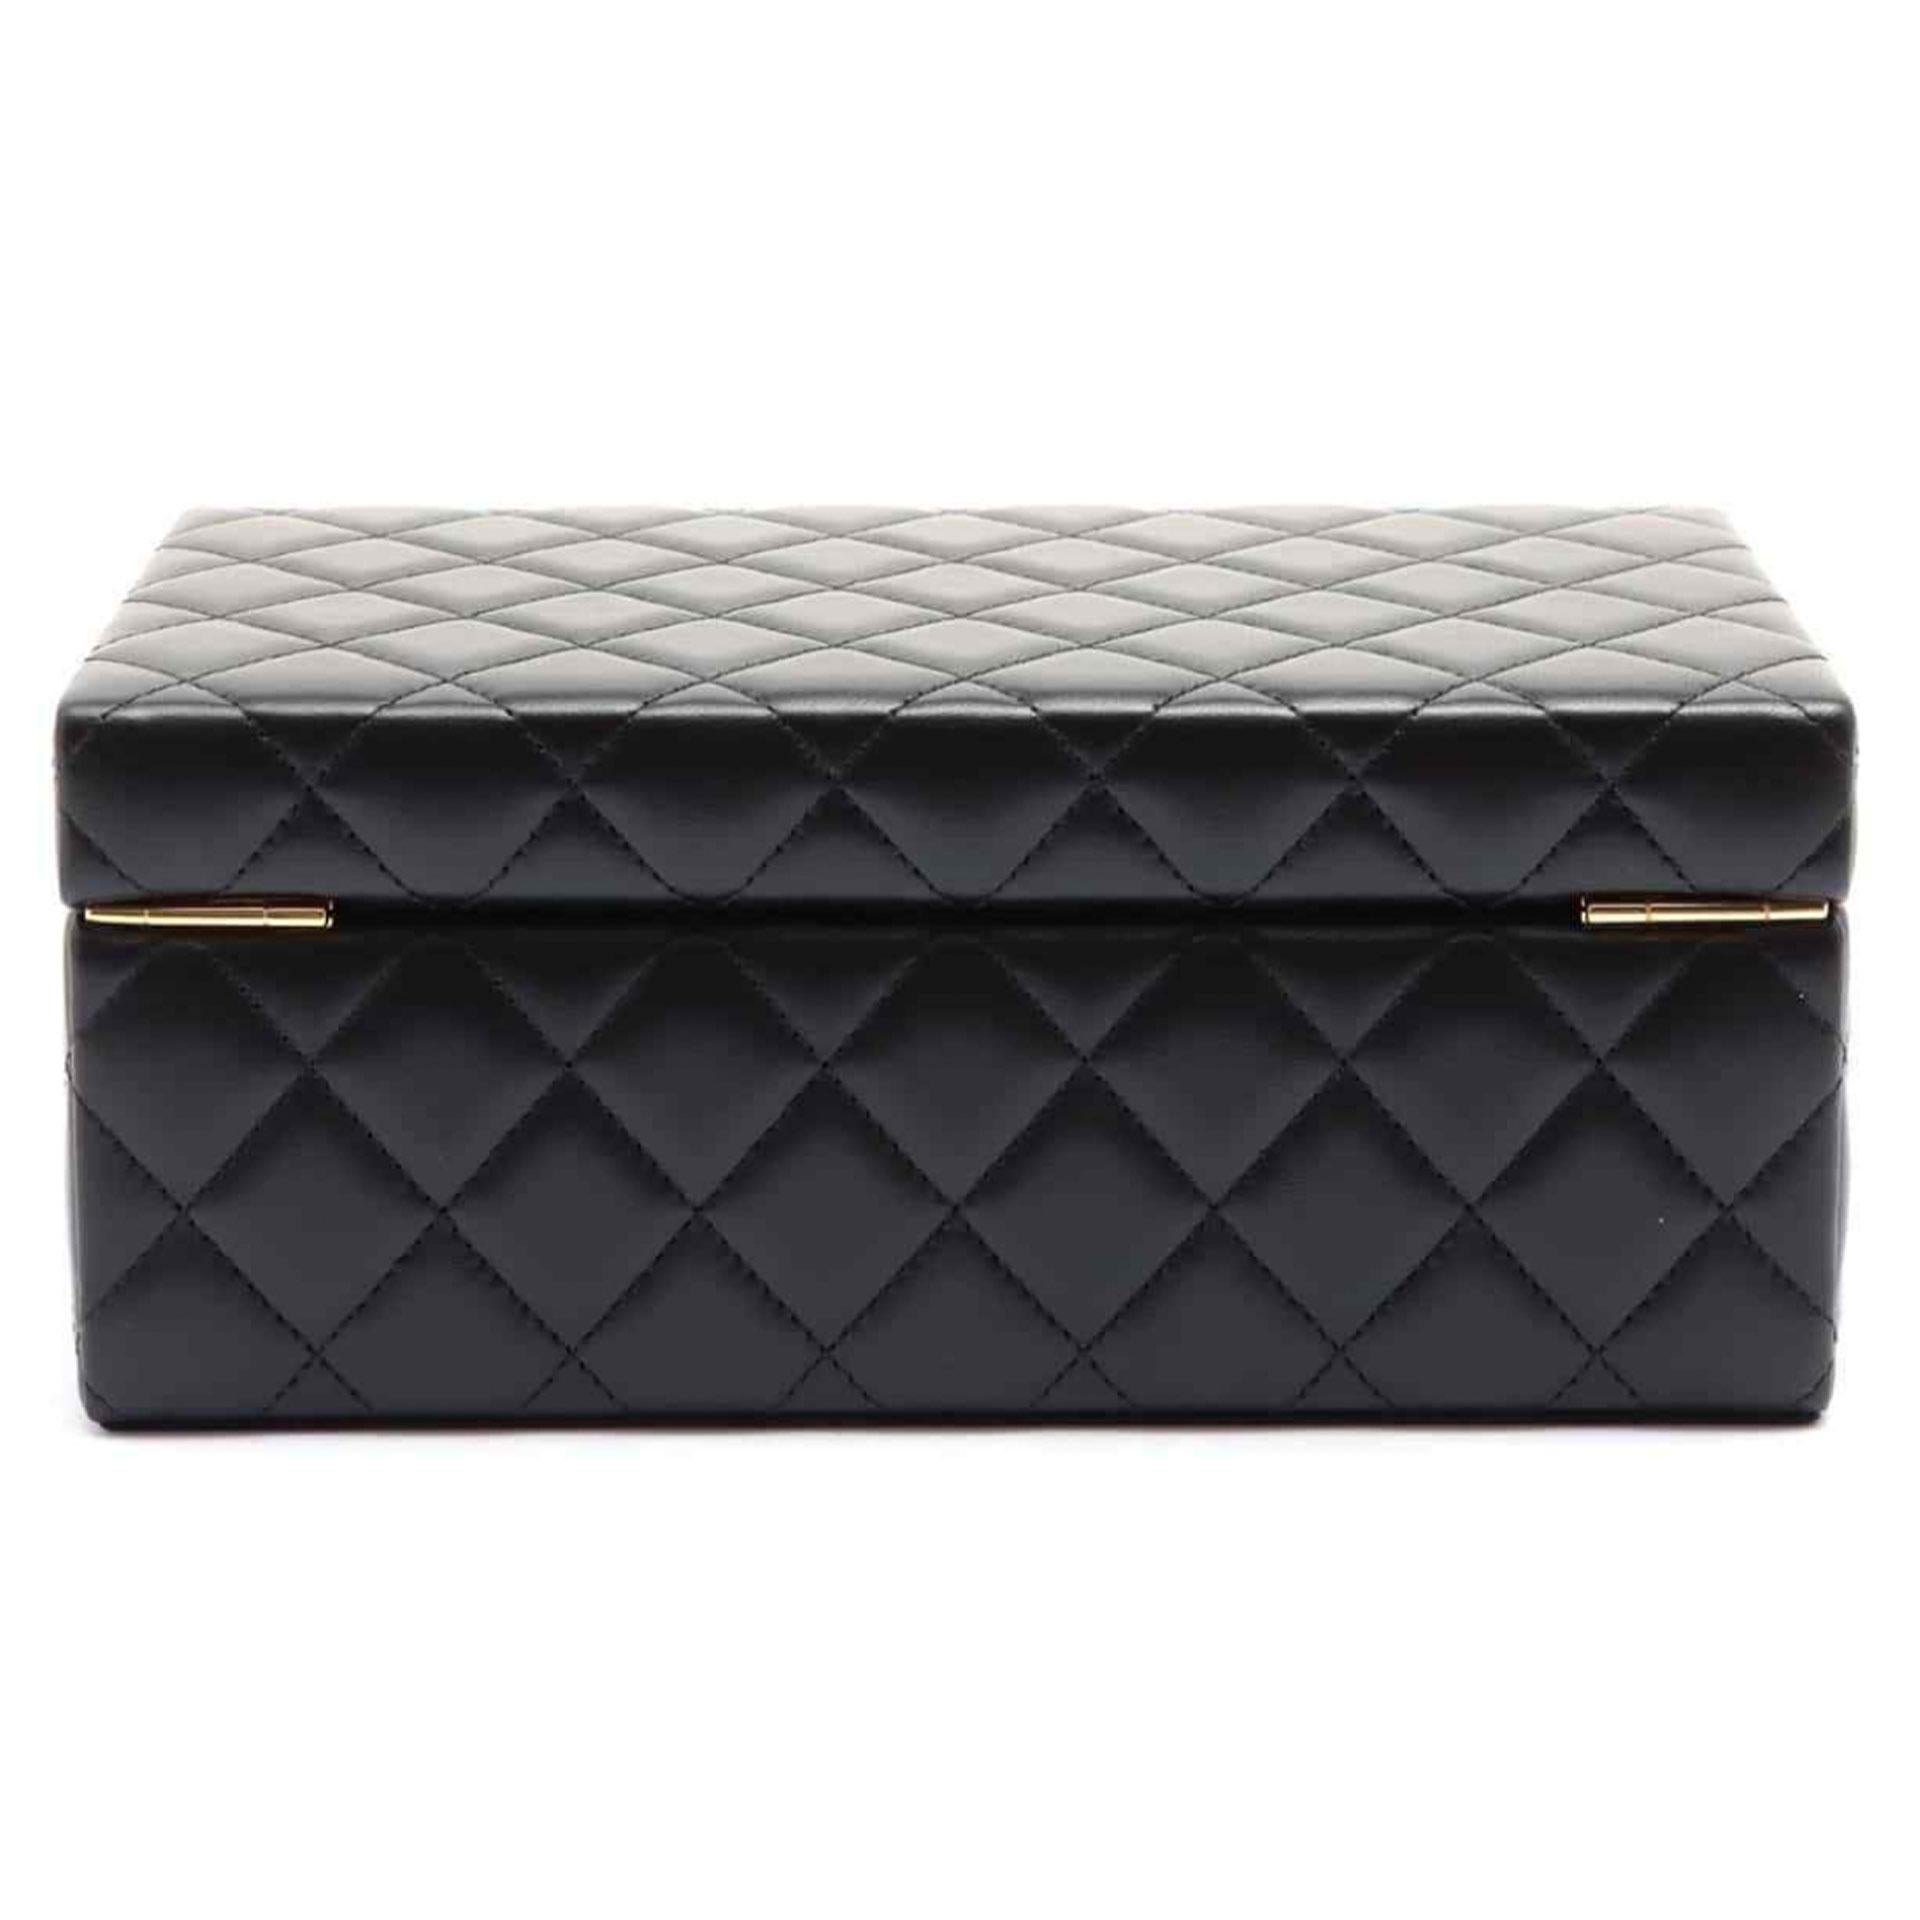 Chanel Rare Limited Edition Black Quilted Lambskin Collector Decor Jewelry Box  Neuf - En vente à Miami, FL